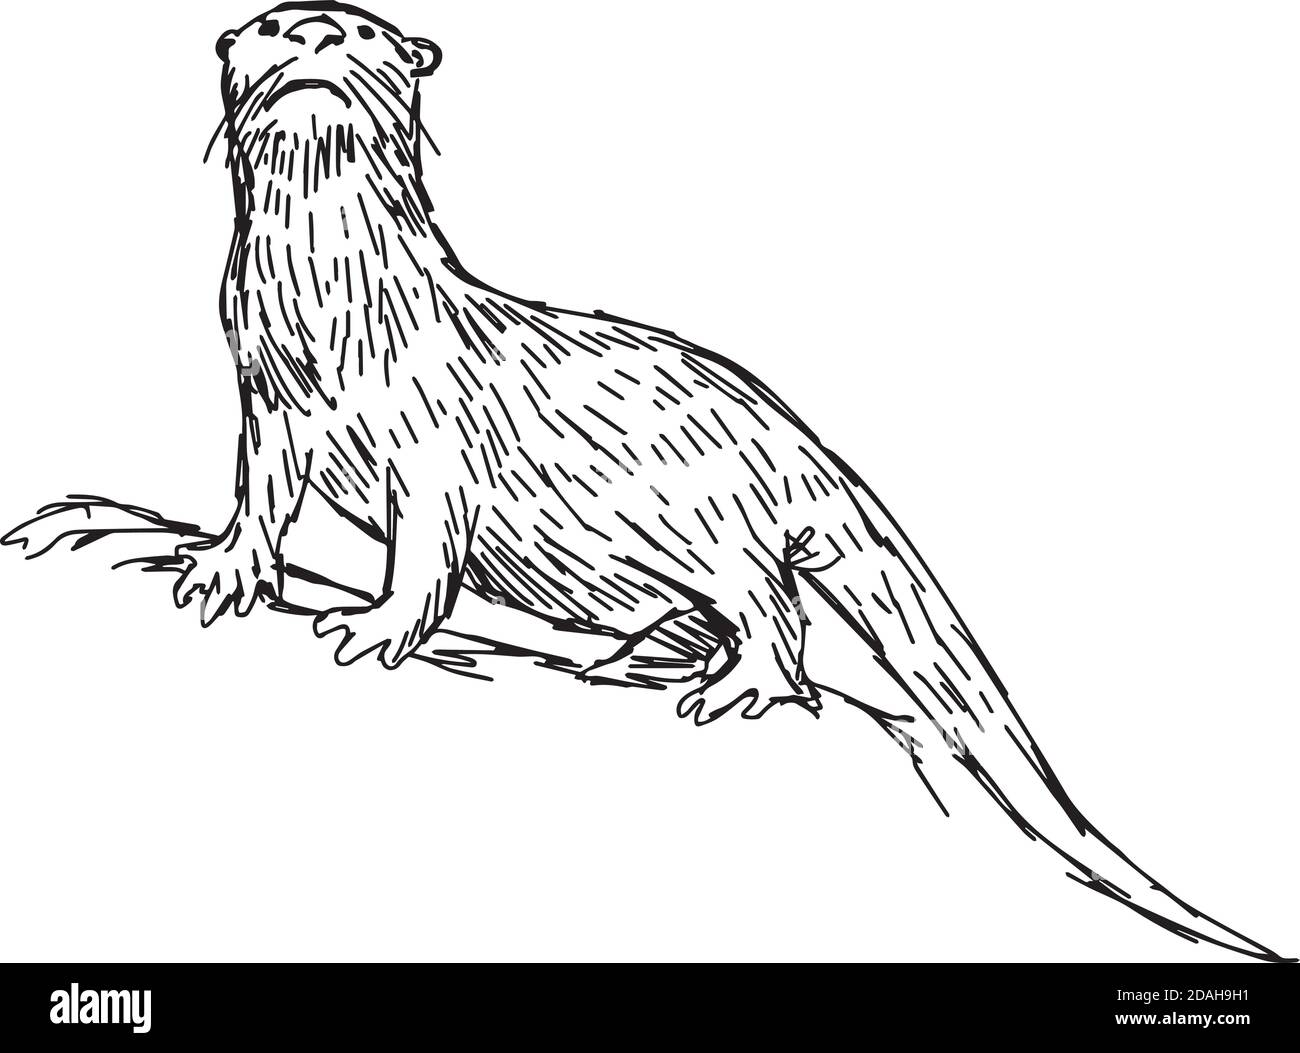 illustration vector hand drawn sketch of African Clawless Otter isolated on white background Stock Vector